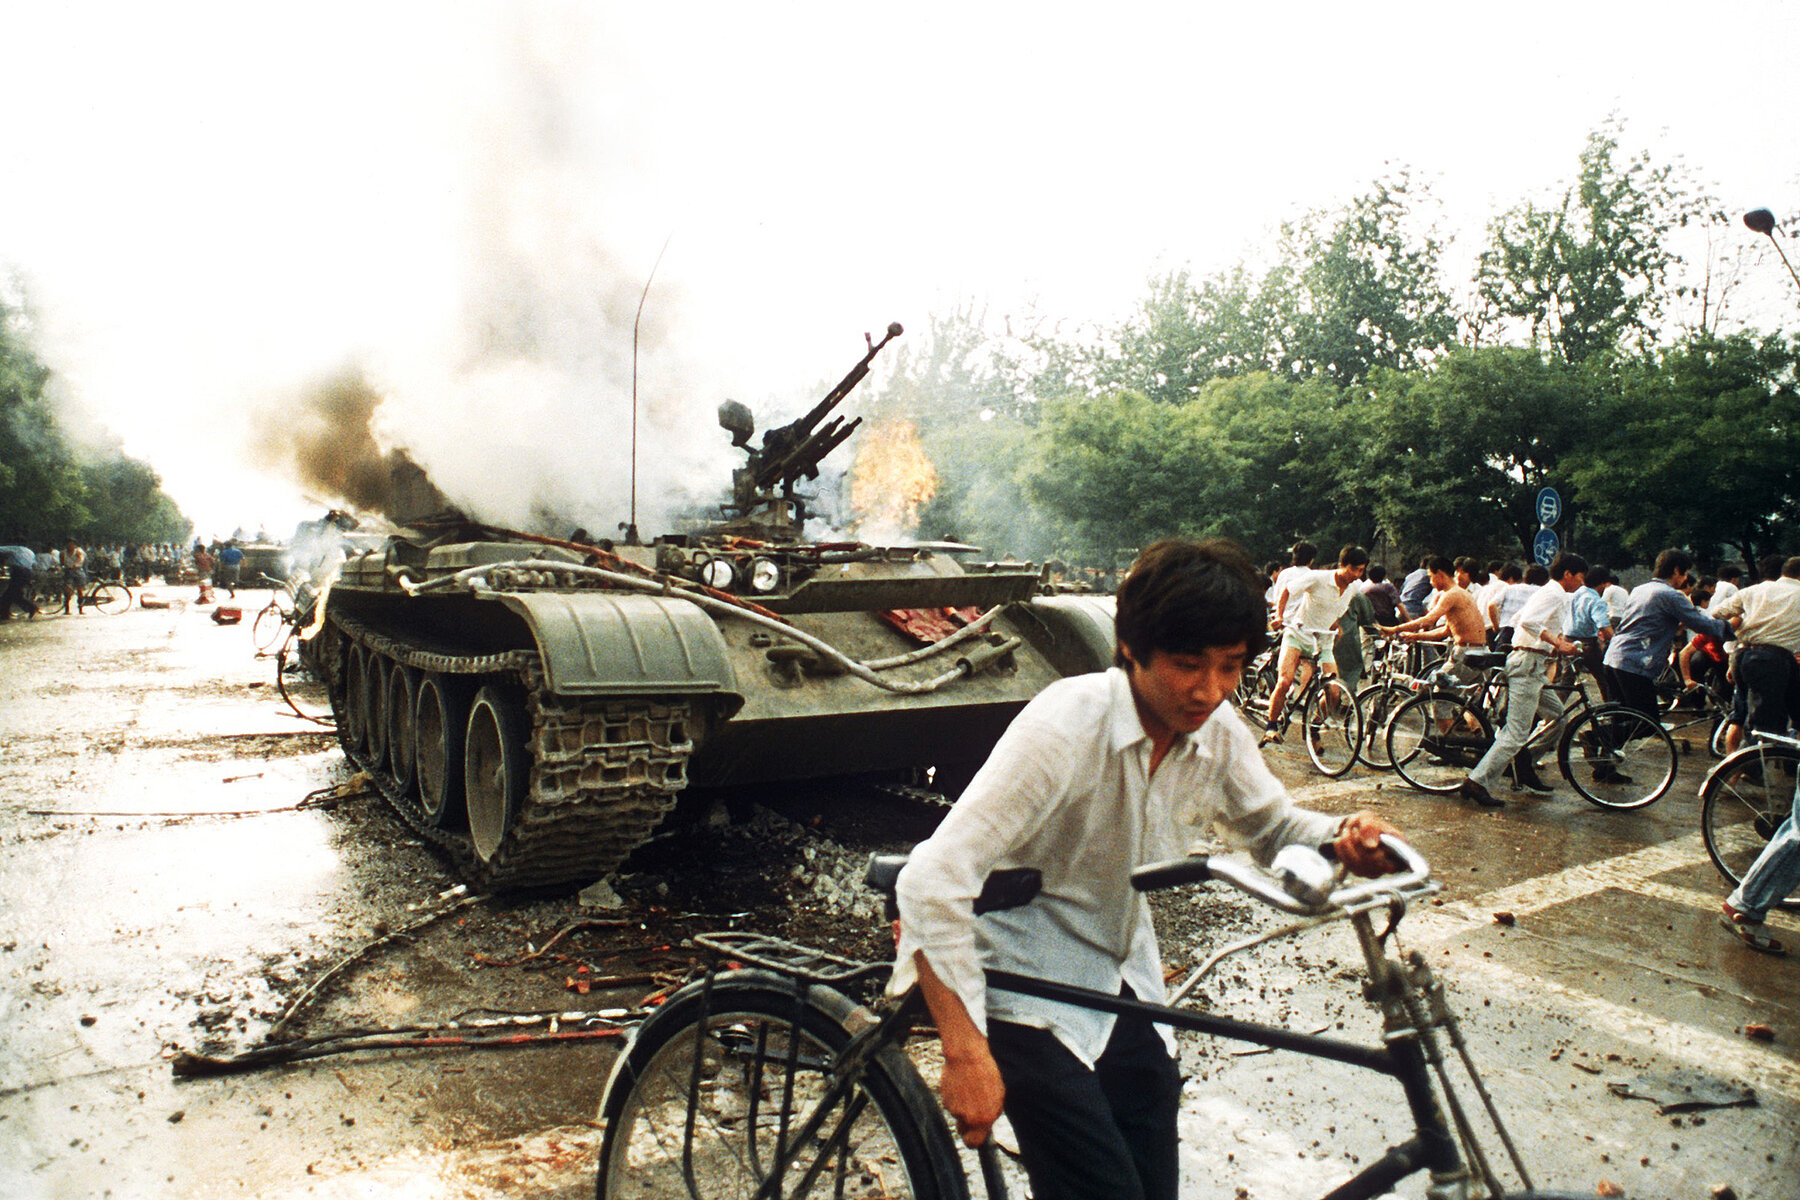 A smoking tank on a street, with a man pushing his bike in the foreground.